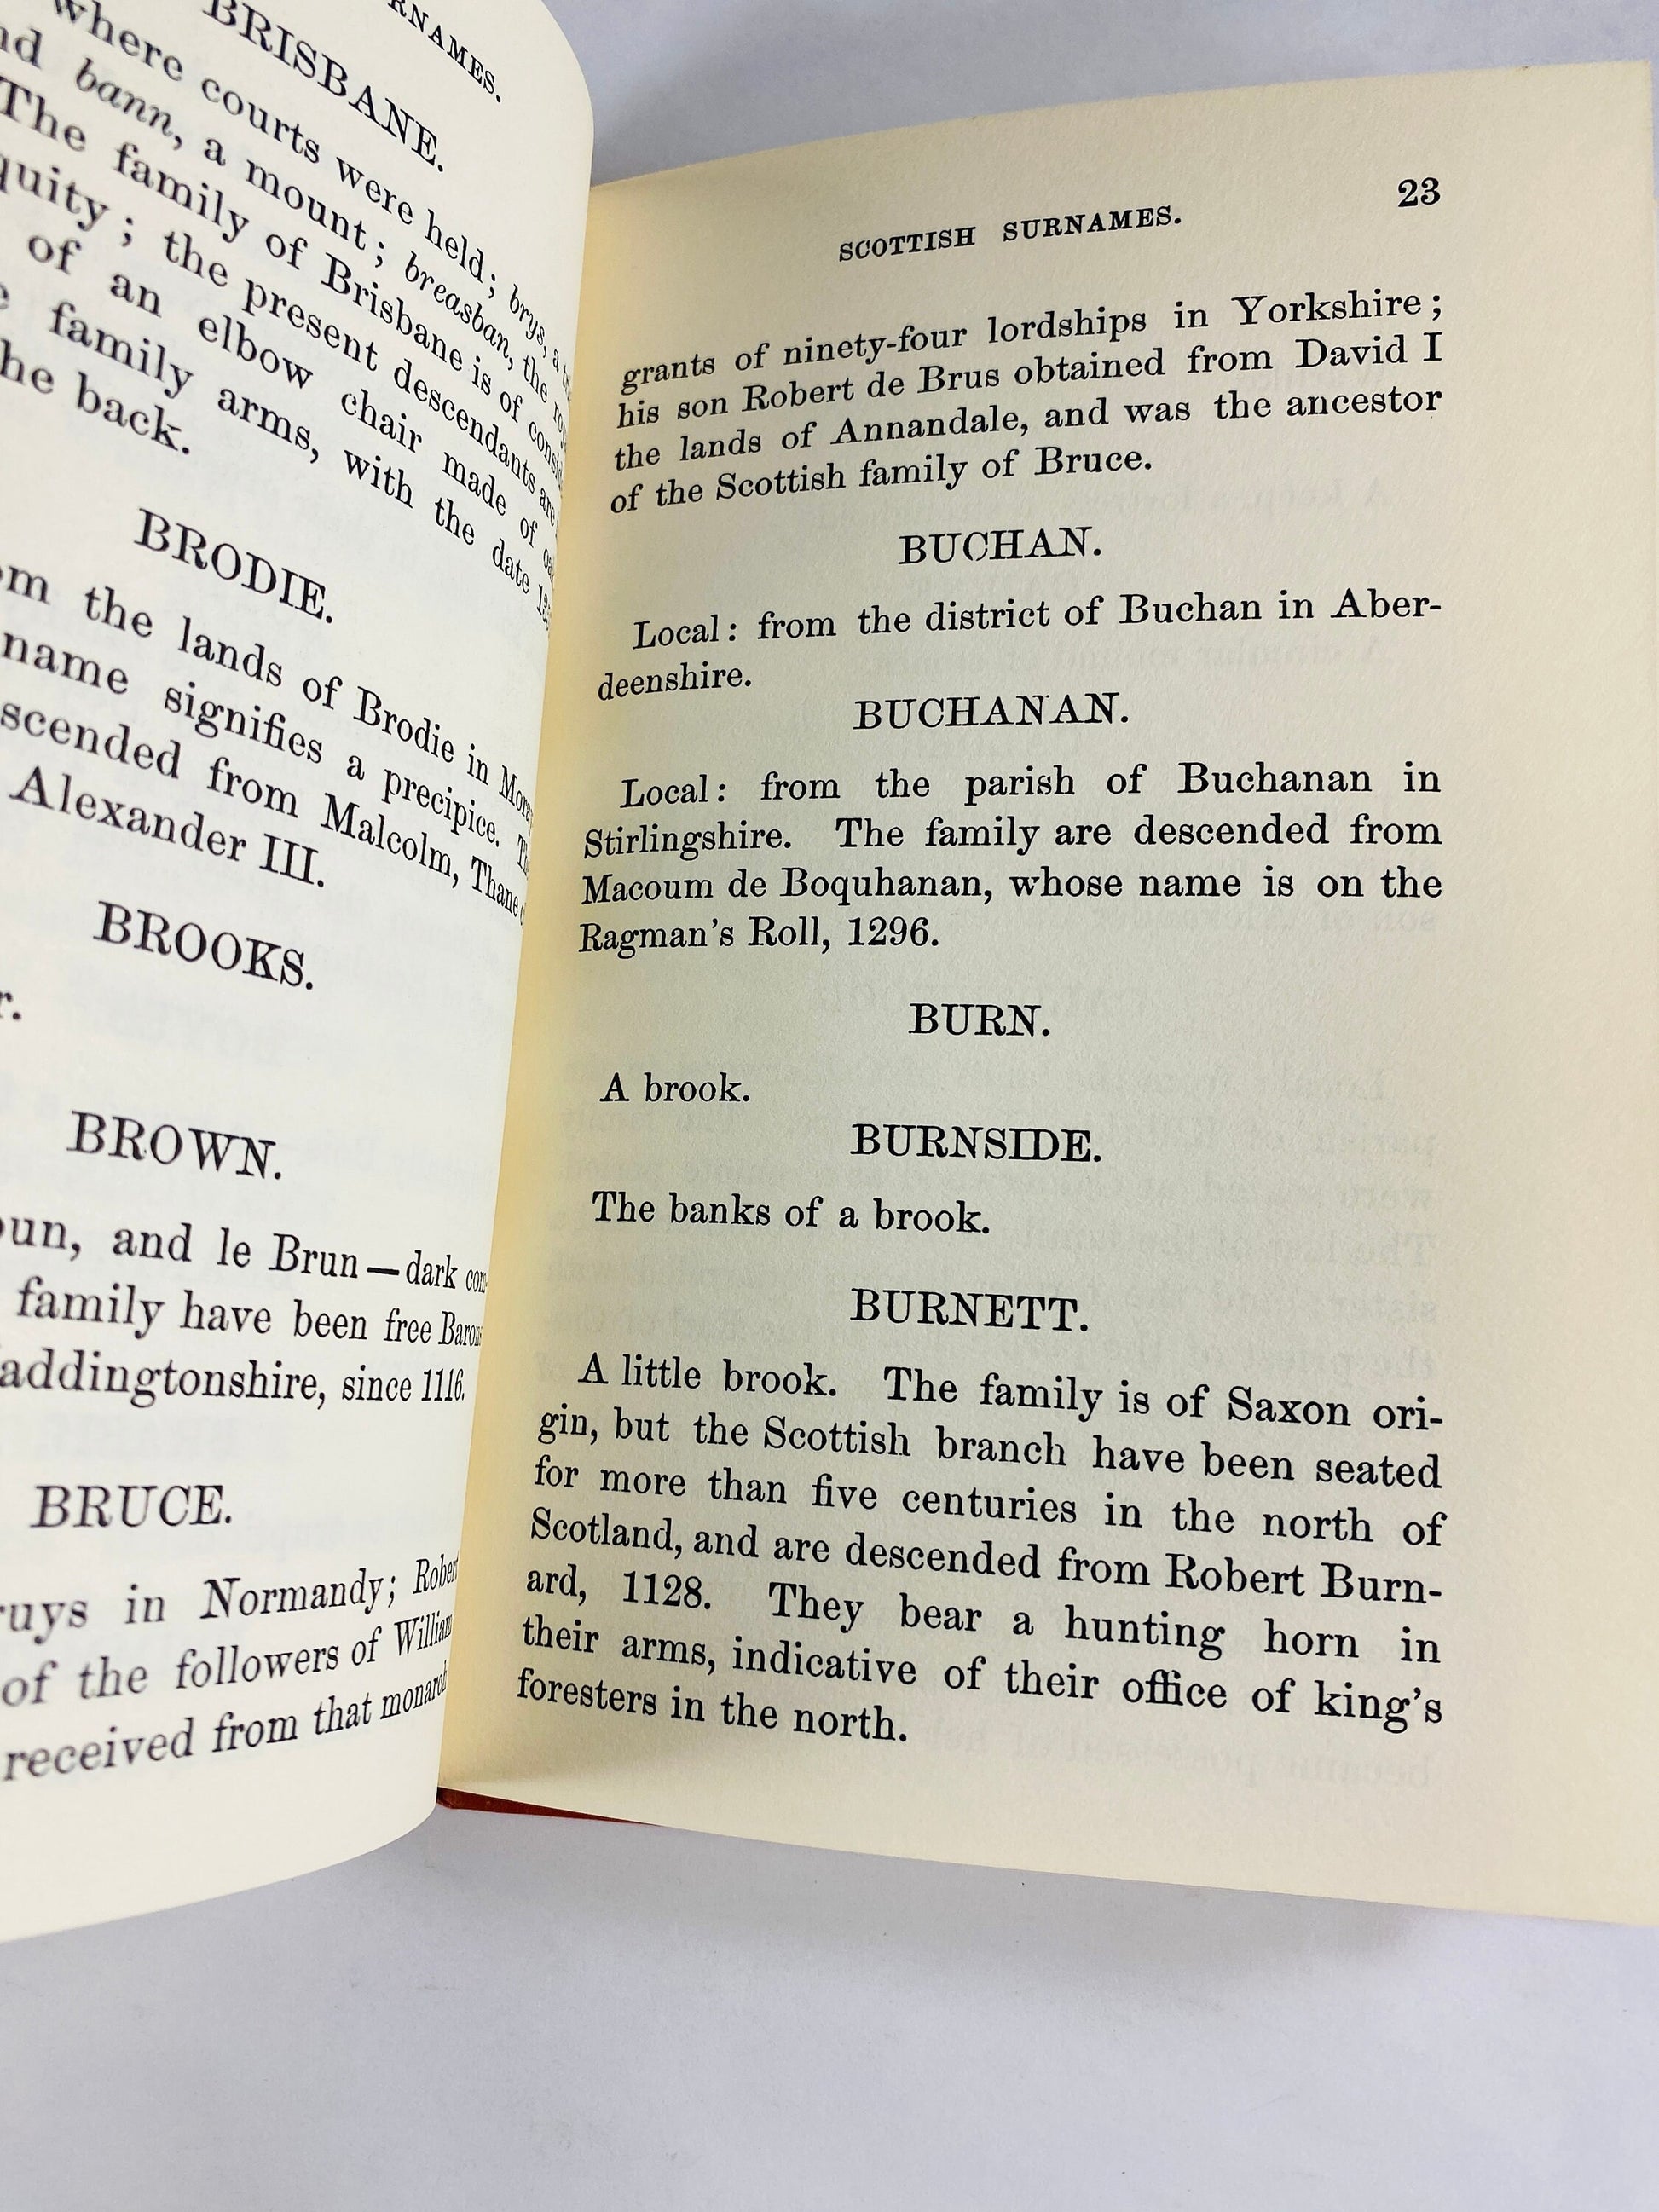 Scottish Surnames Origin and Signification vintage book by Clifford Sims Genealogy gift Father's Day Scotland home decor family lineage